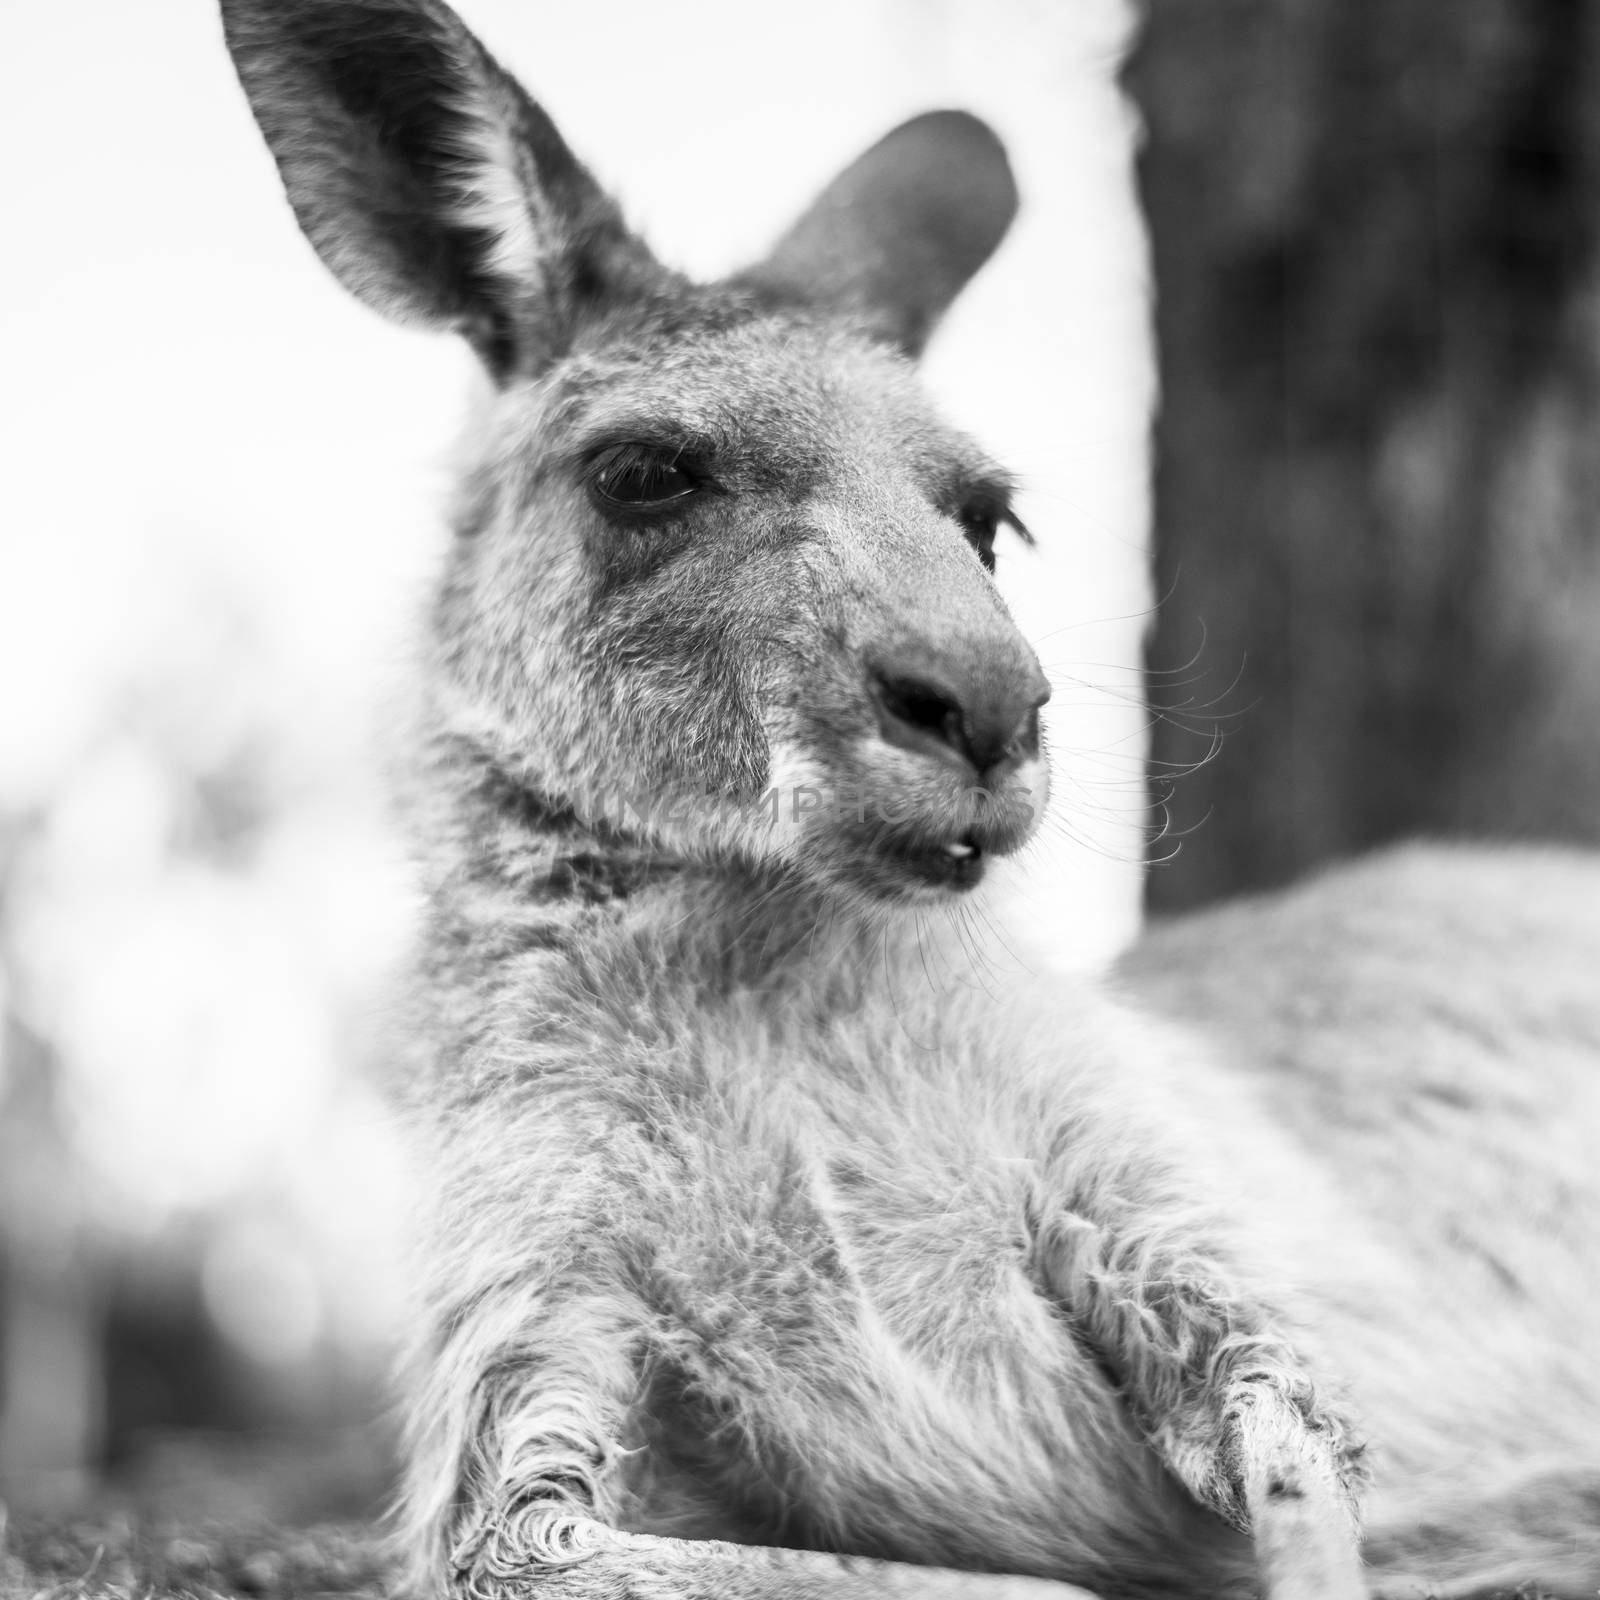 Kangaroo outside during the day. by artistrobd